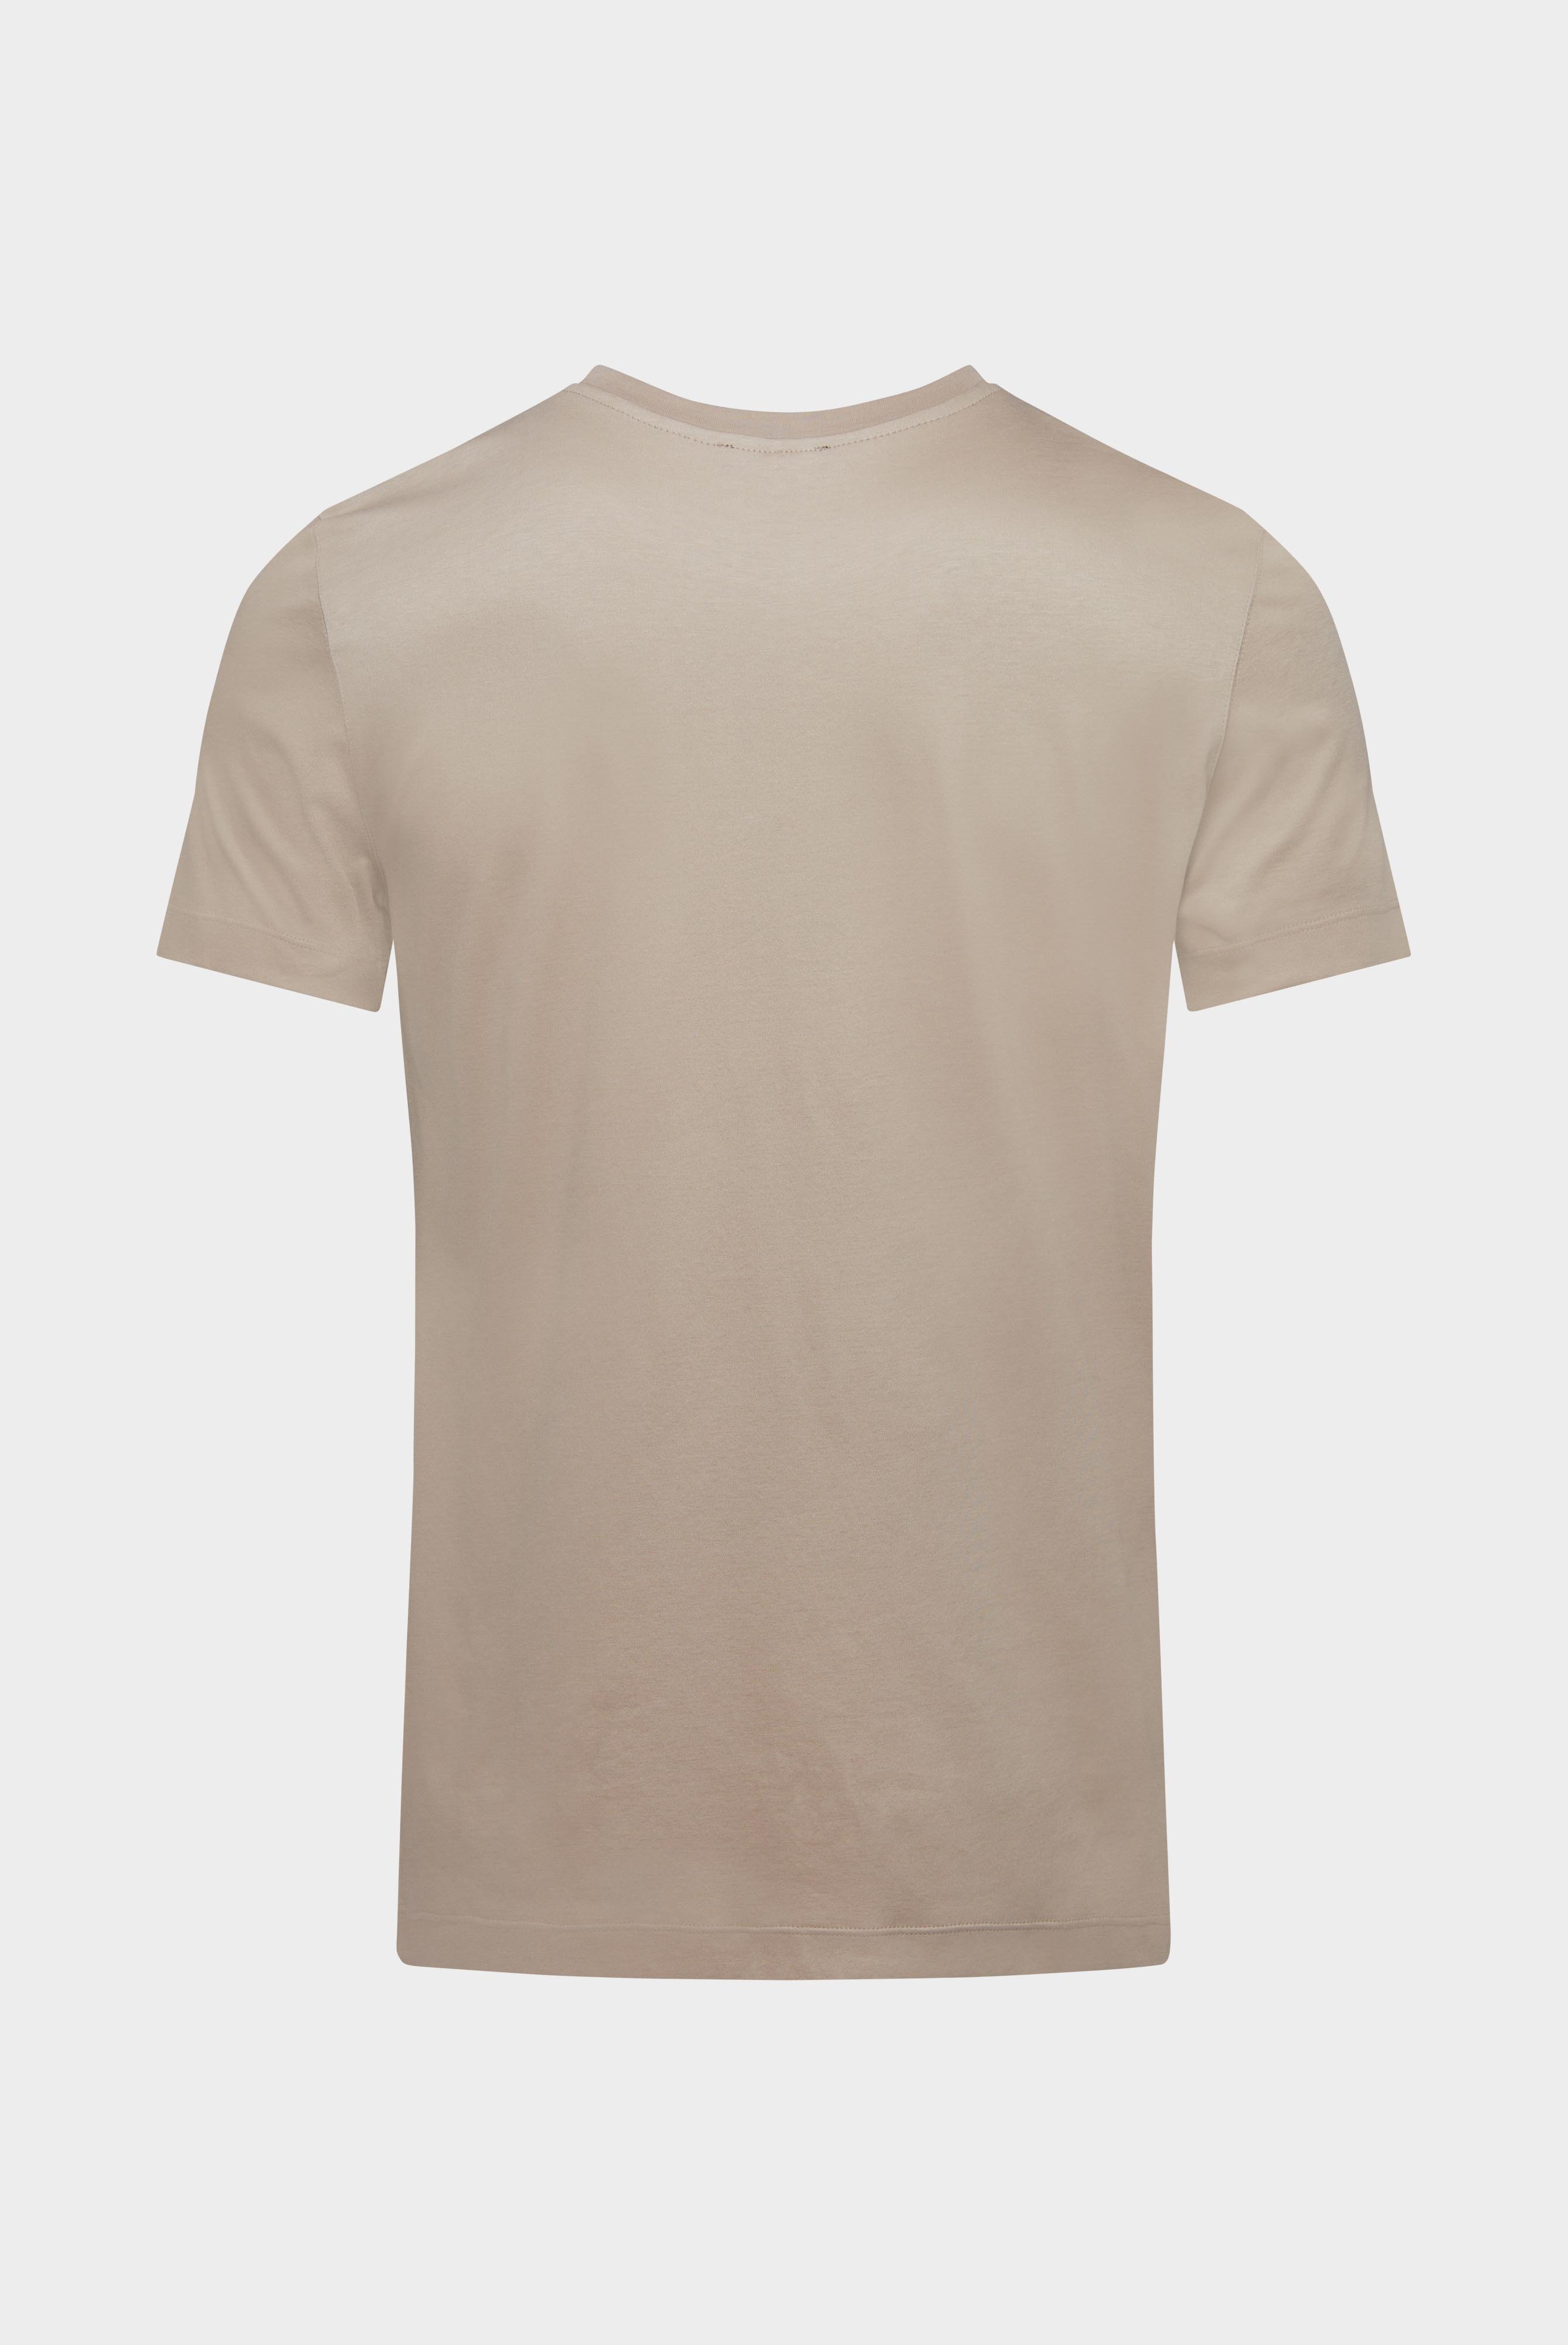 T-Shirts+T-Shirt made of Swiss Cotton+20.1717.UX.180031.140.S